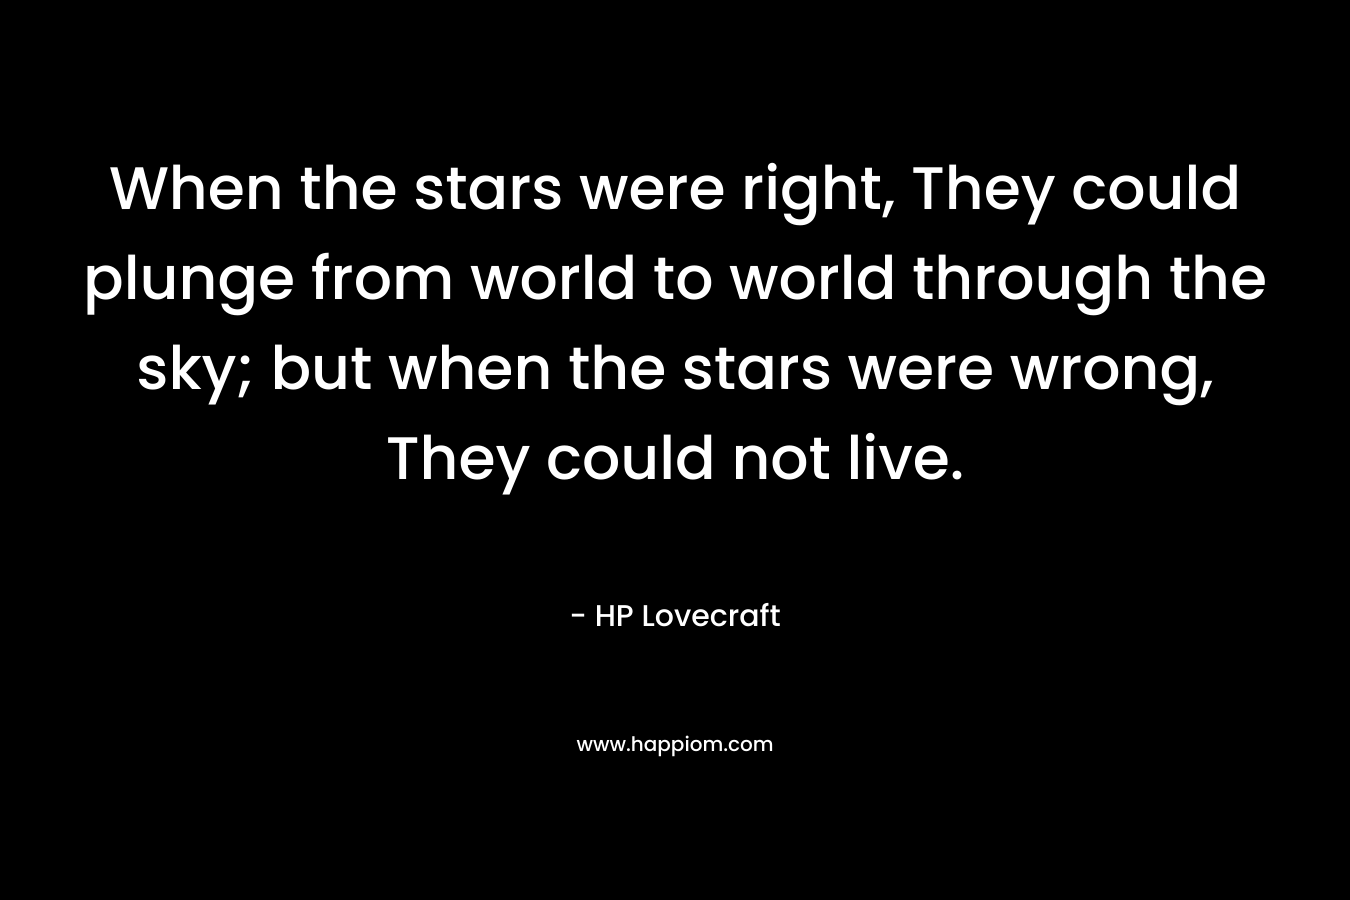 When the stars were right, They could plunge from world to world through the sky; but when the stars were wrong, They could not live.